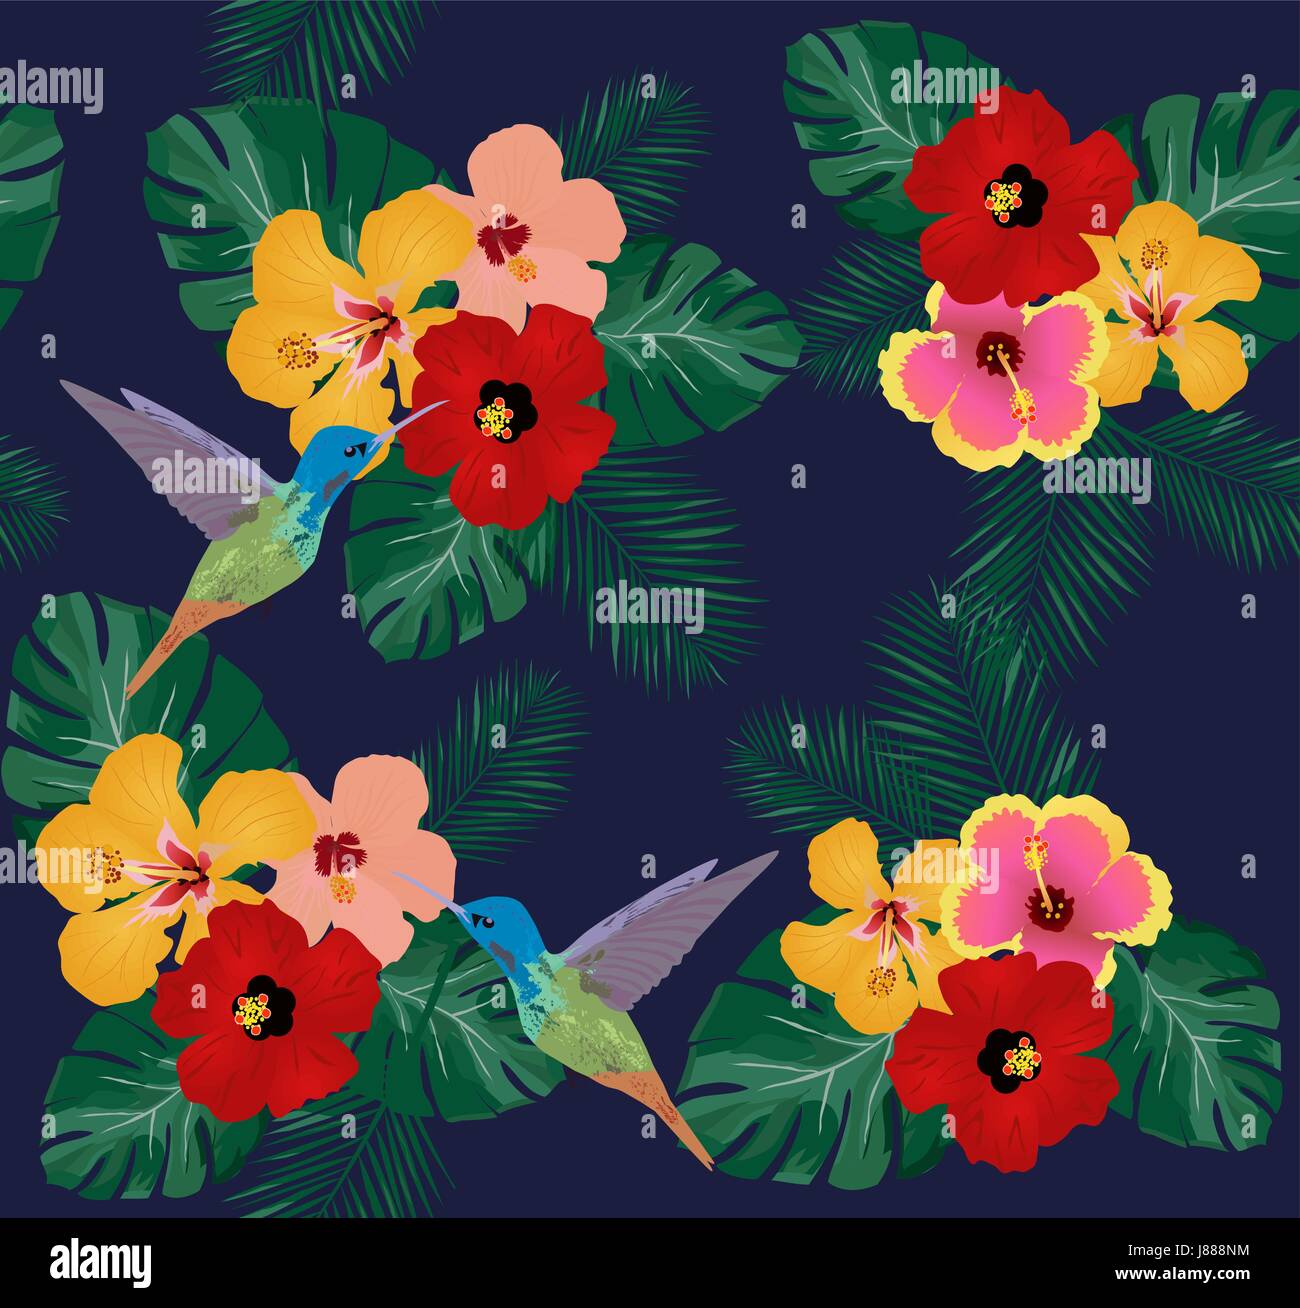 vector illustration of floral background with tropical flowers, hummingbirds Stock Vector